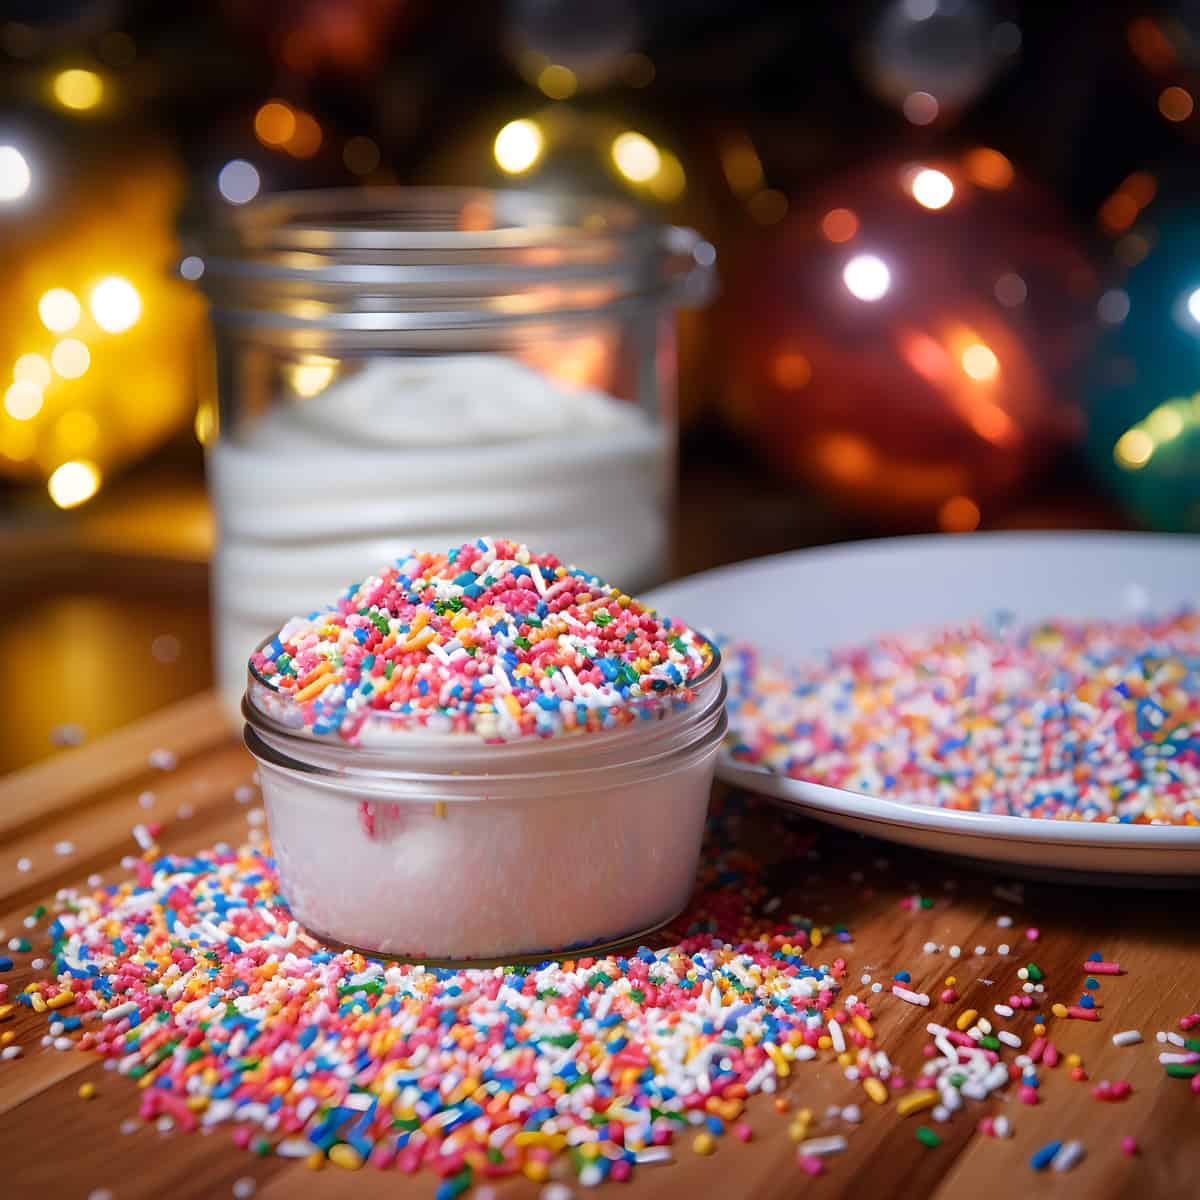 Sprinkles on a kitchen counter